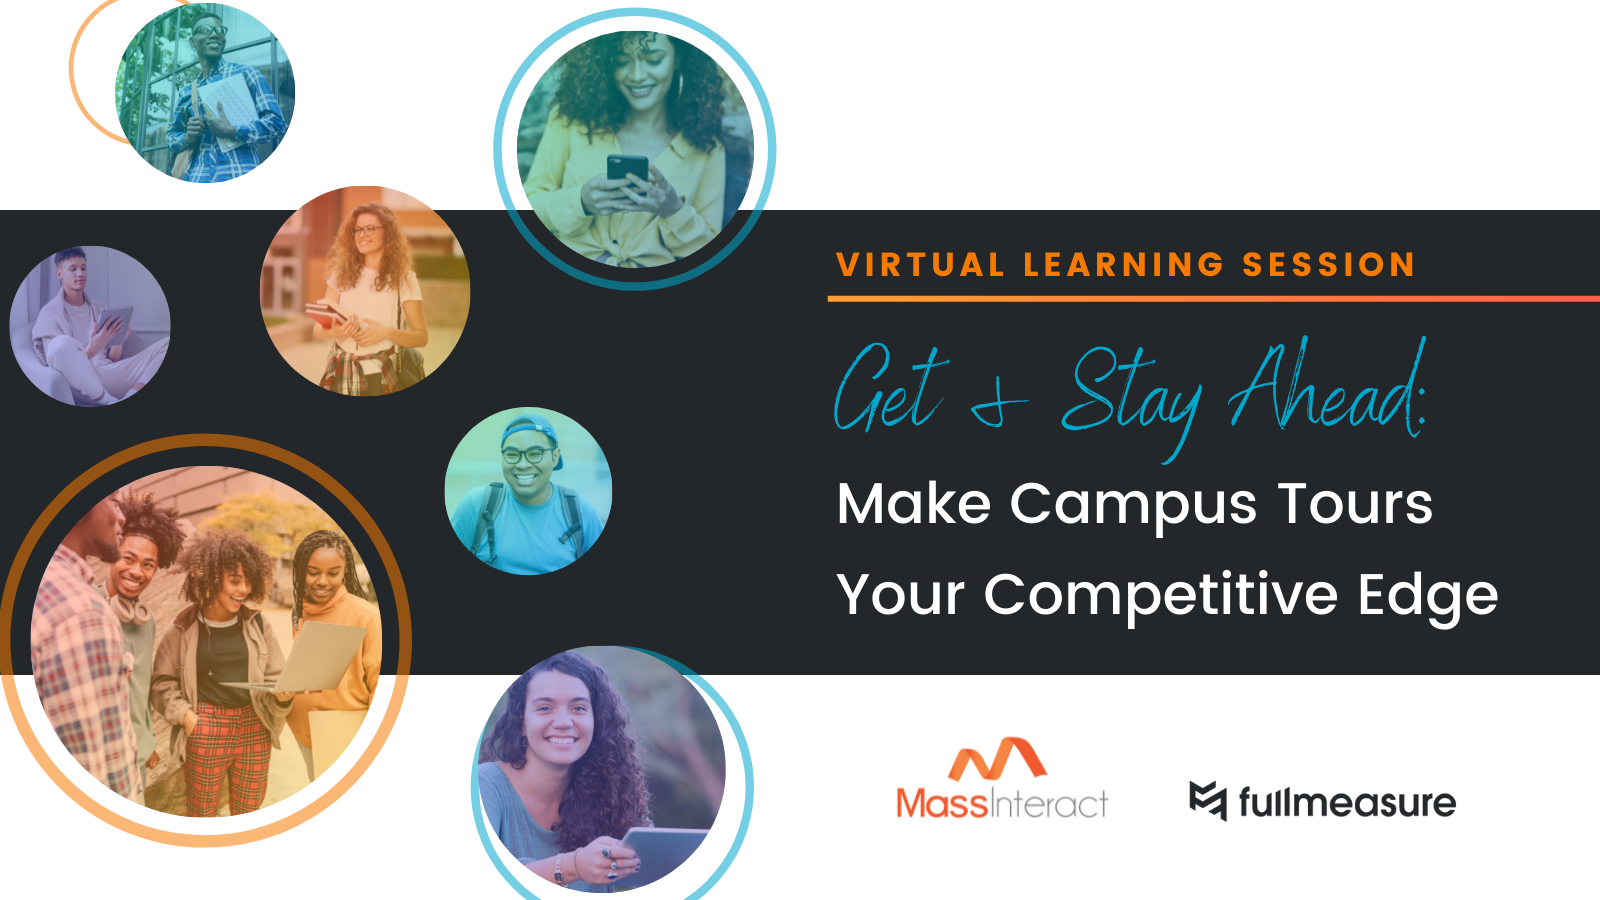 Make Campus Tours Your Competitive Edge webinar